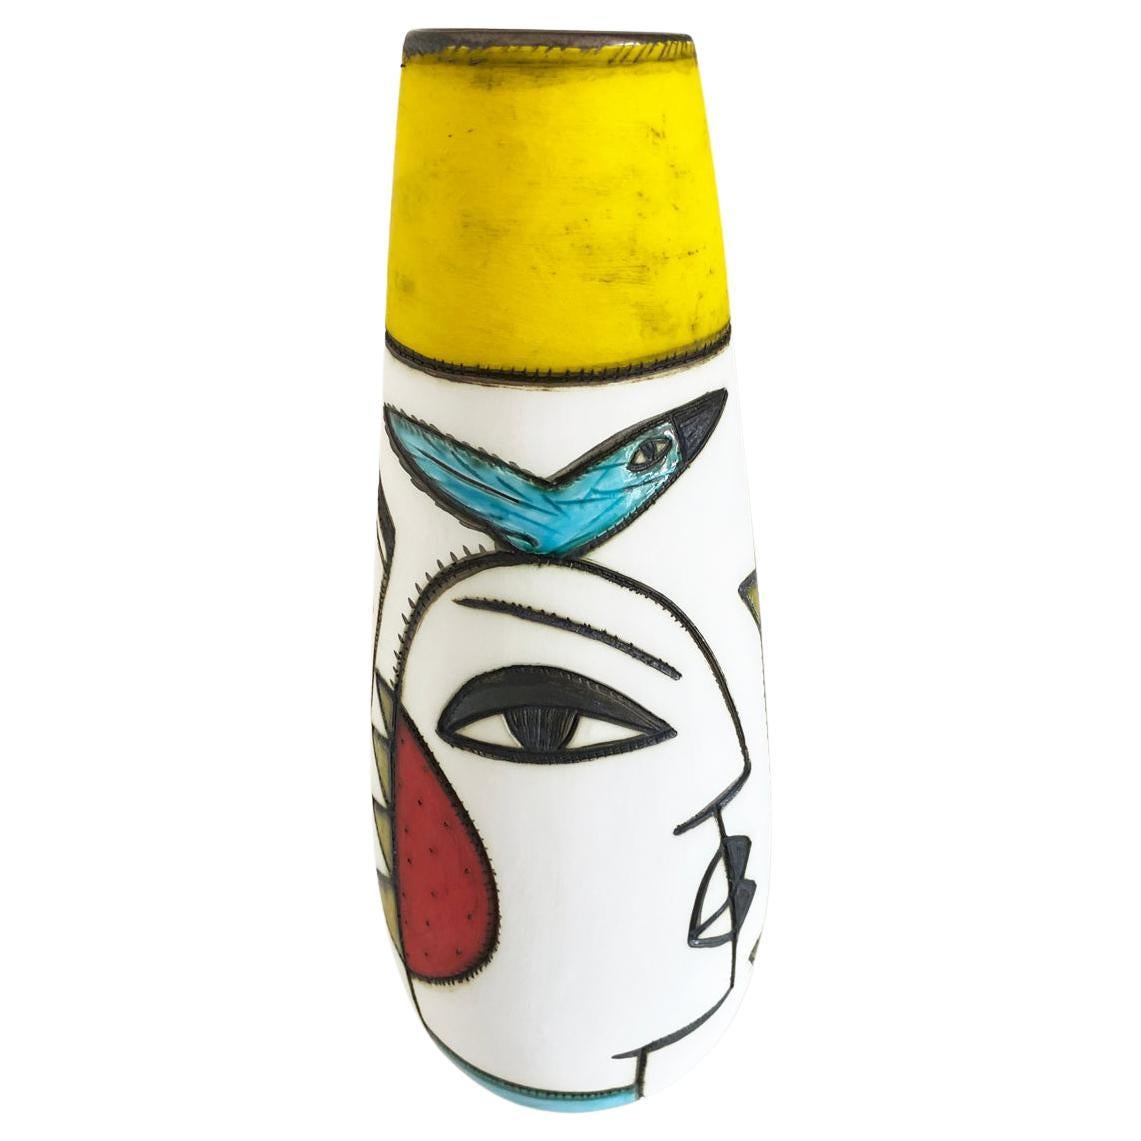 A pottery conical face vase by widely collected South African ceramicist Charmaine Haines, produced 2020.


Charmaine Haines was born in 1963 in Grahamstown and trained under Hylton Nel at the Port Elizabeth Technikon and obtained a Higher